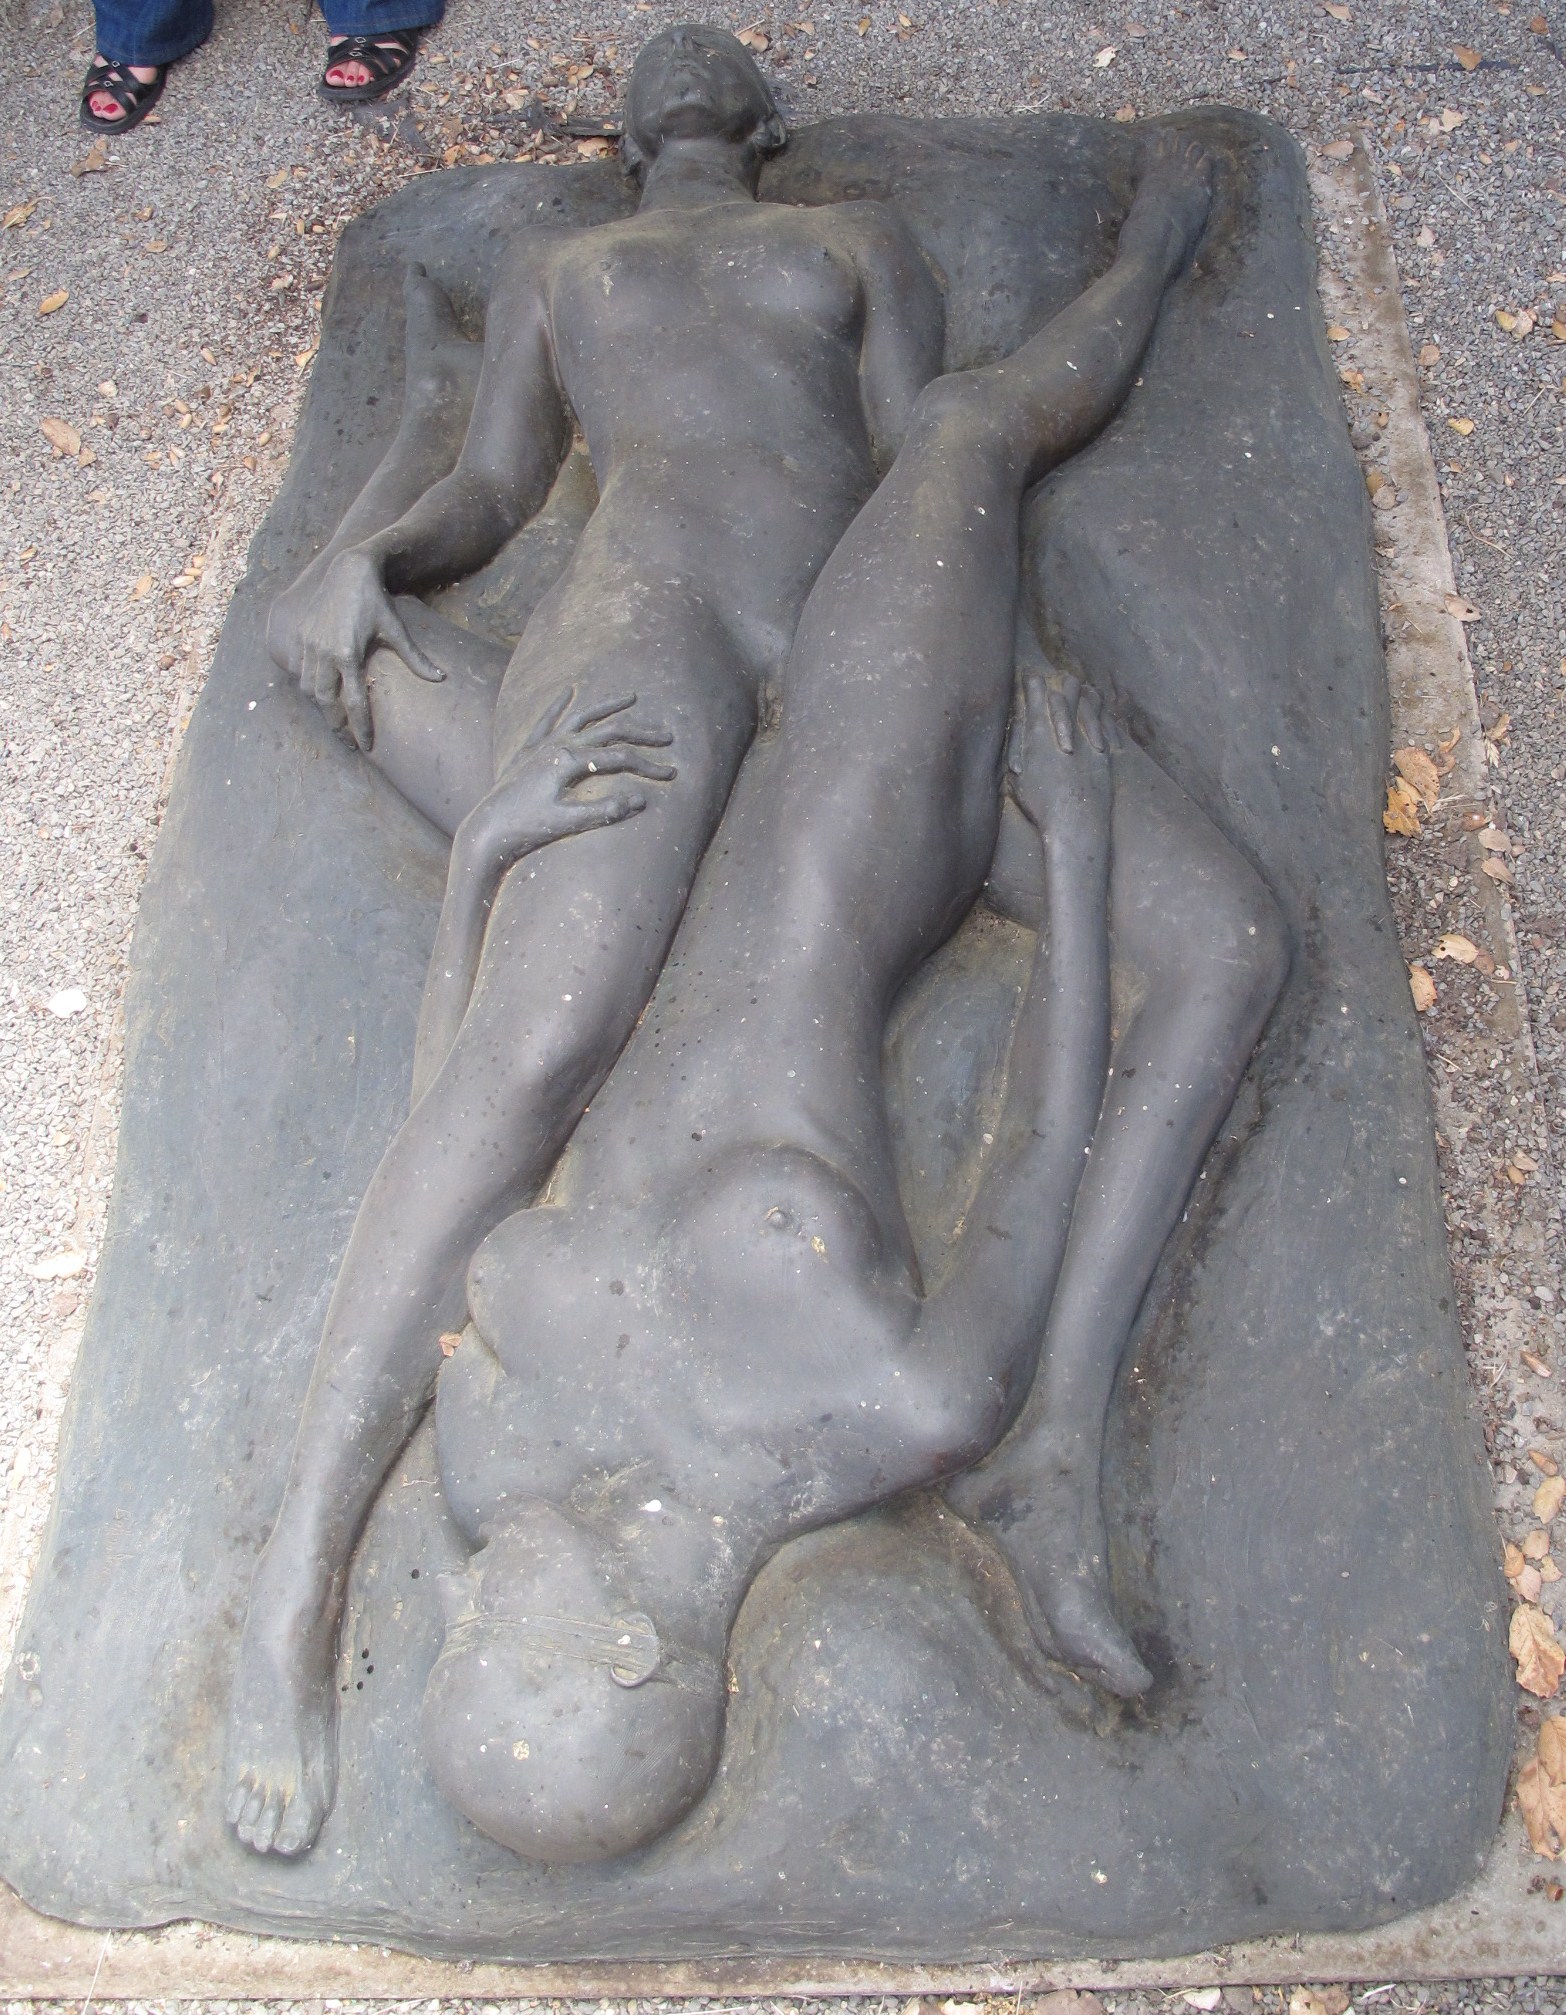 the statue is laid out outside on the sidewalk